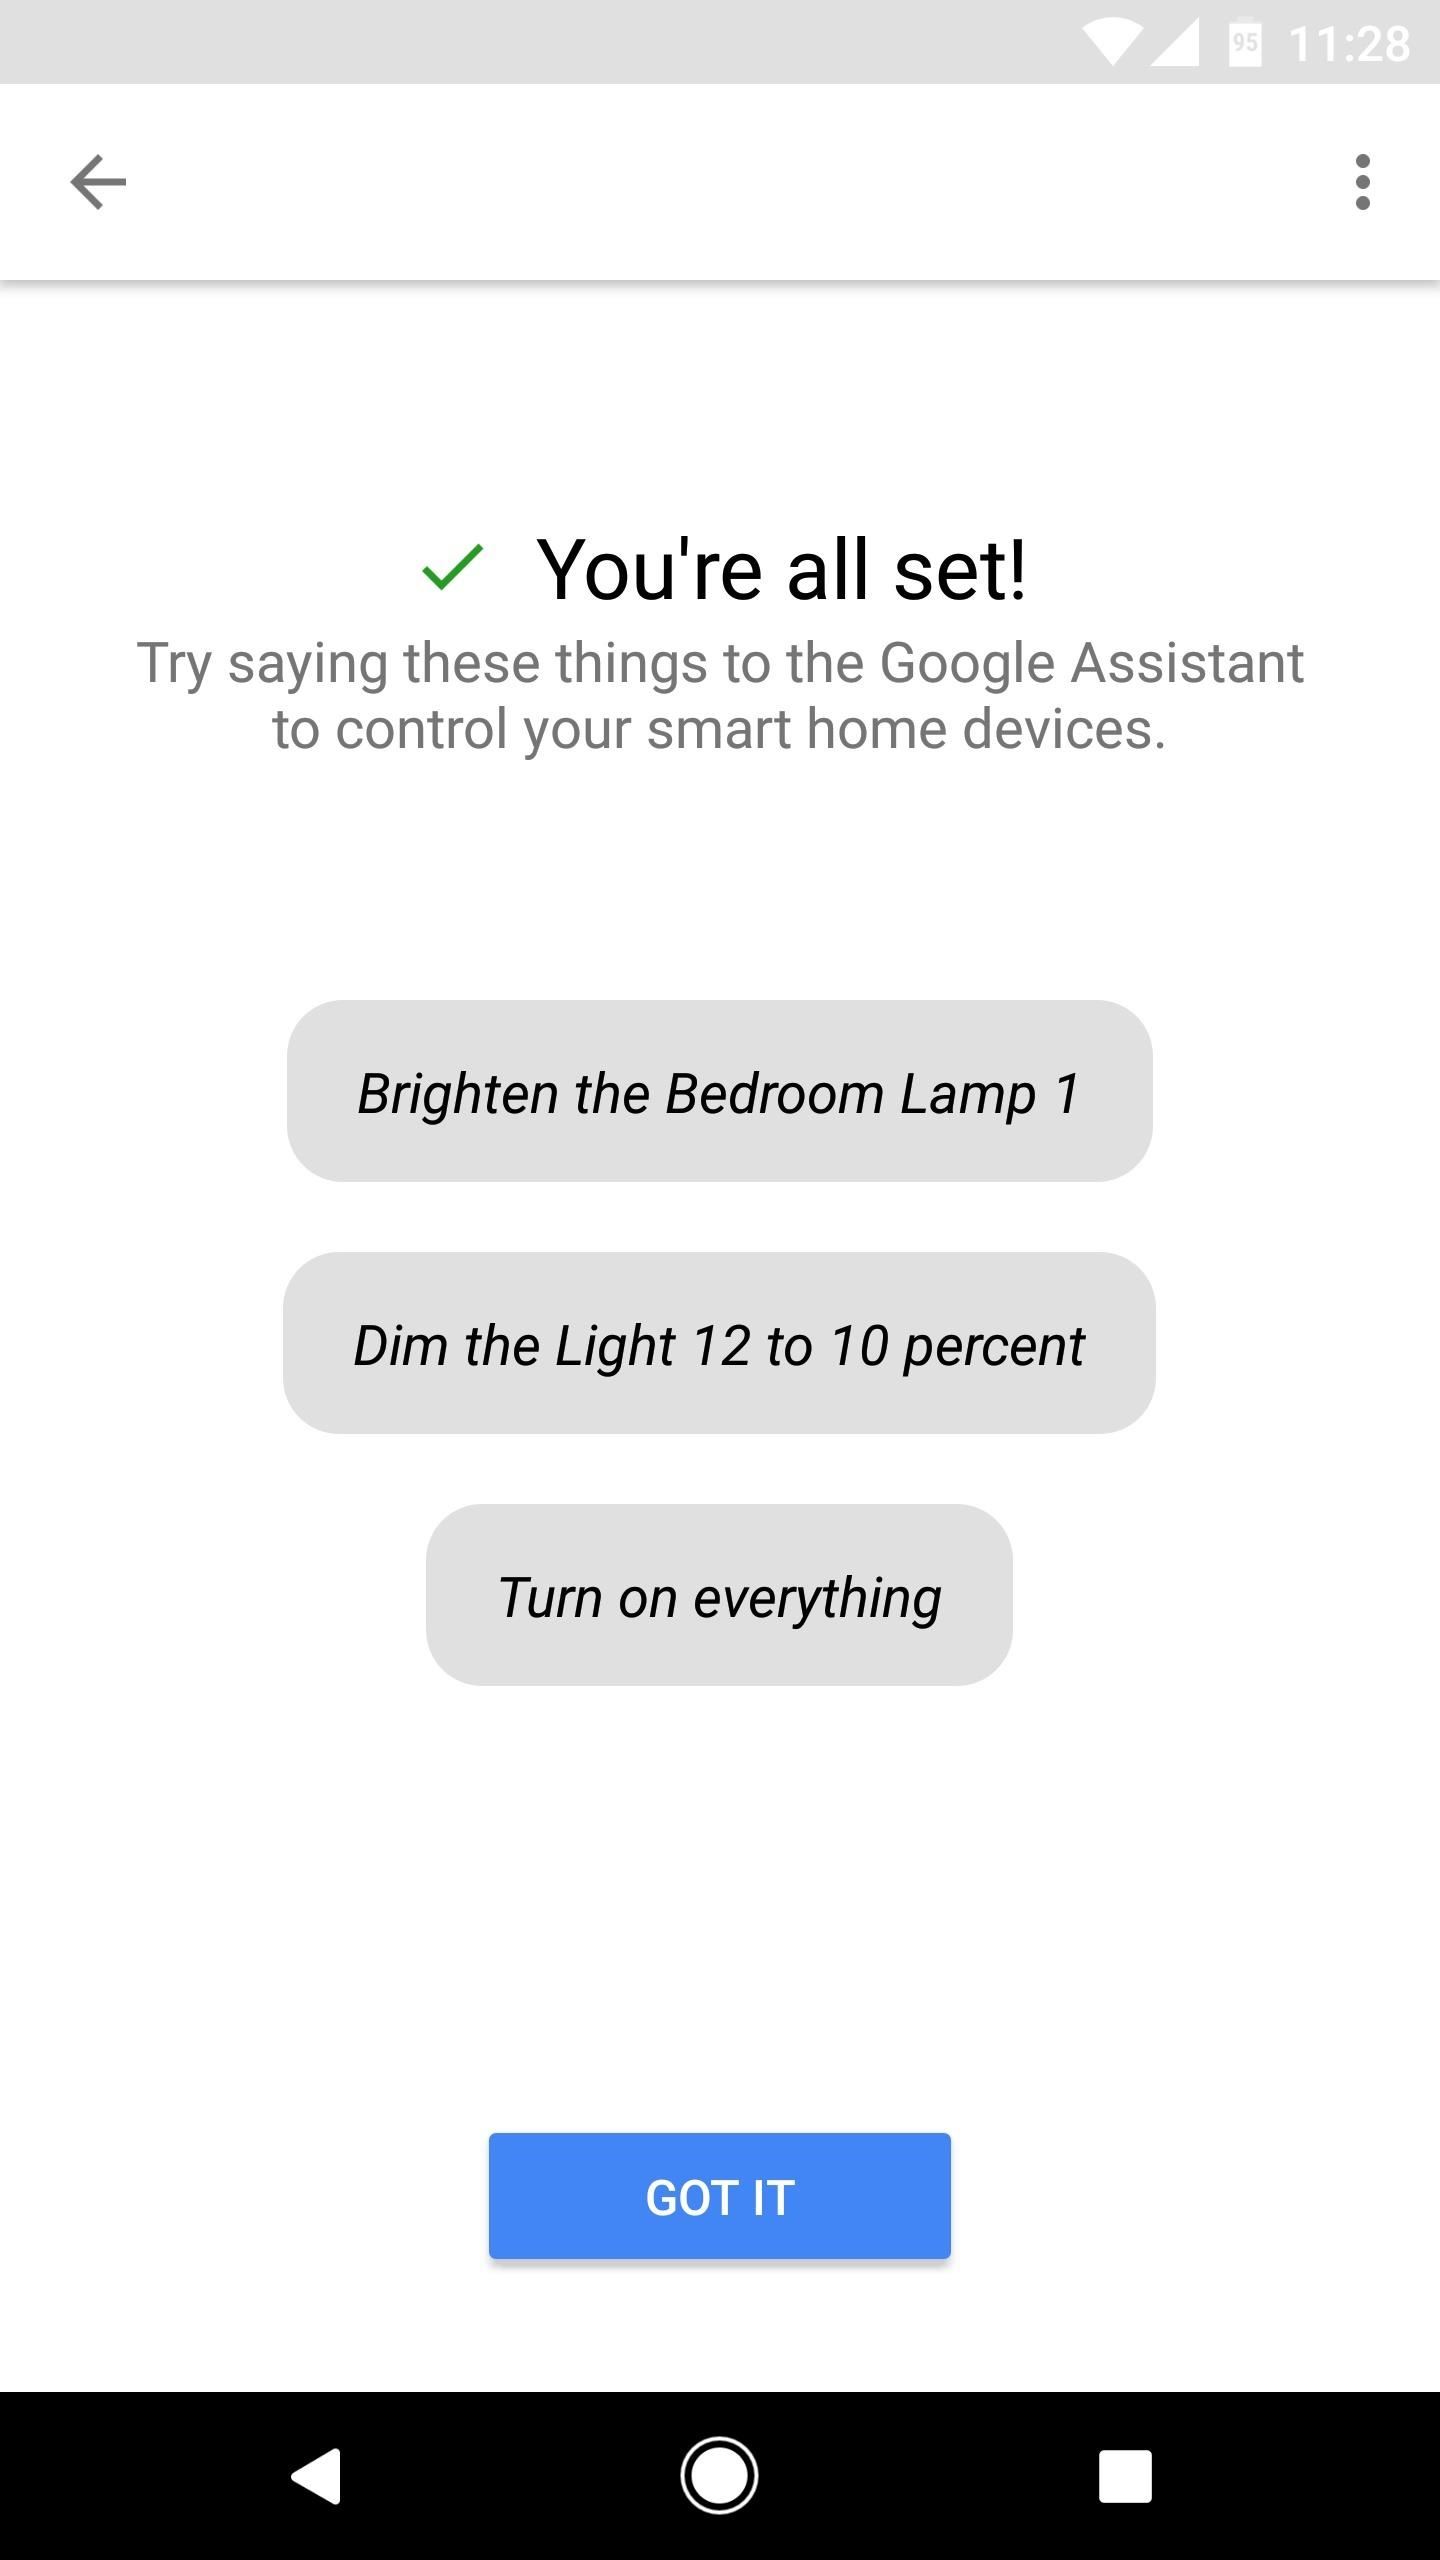 Google Assistant 101: How to Add Your Smart Home Devices to Control Them by Voice